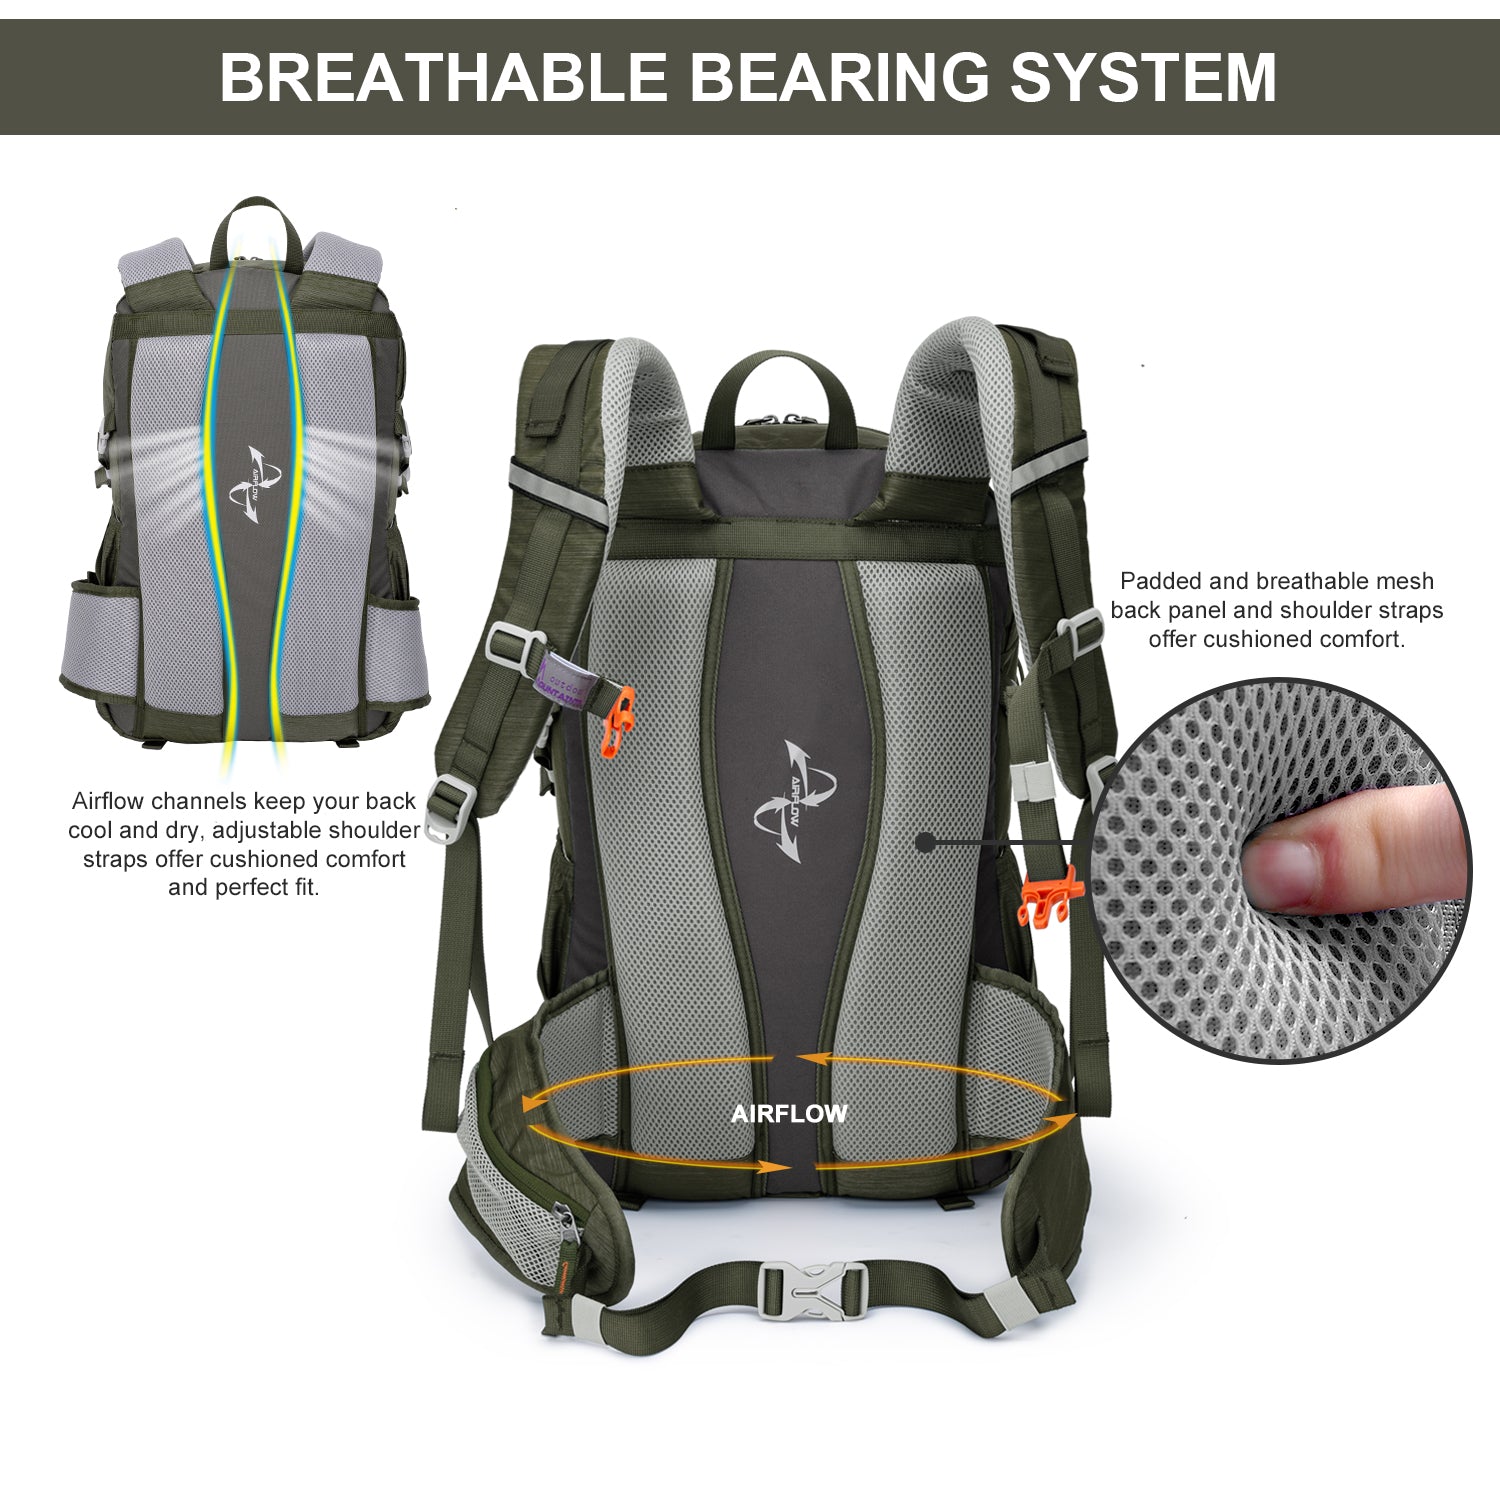 Breathable Bearing System,Airflow system,day hiking backpack